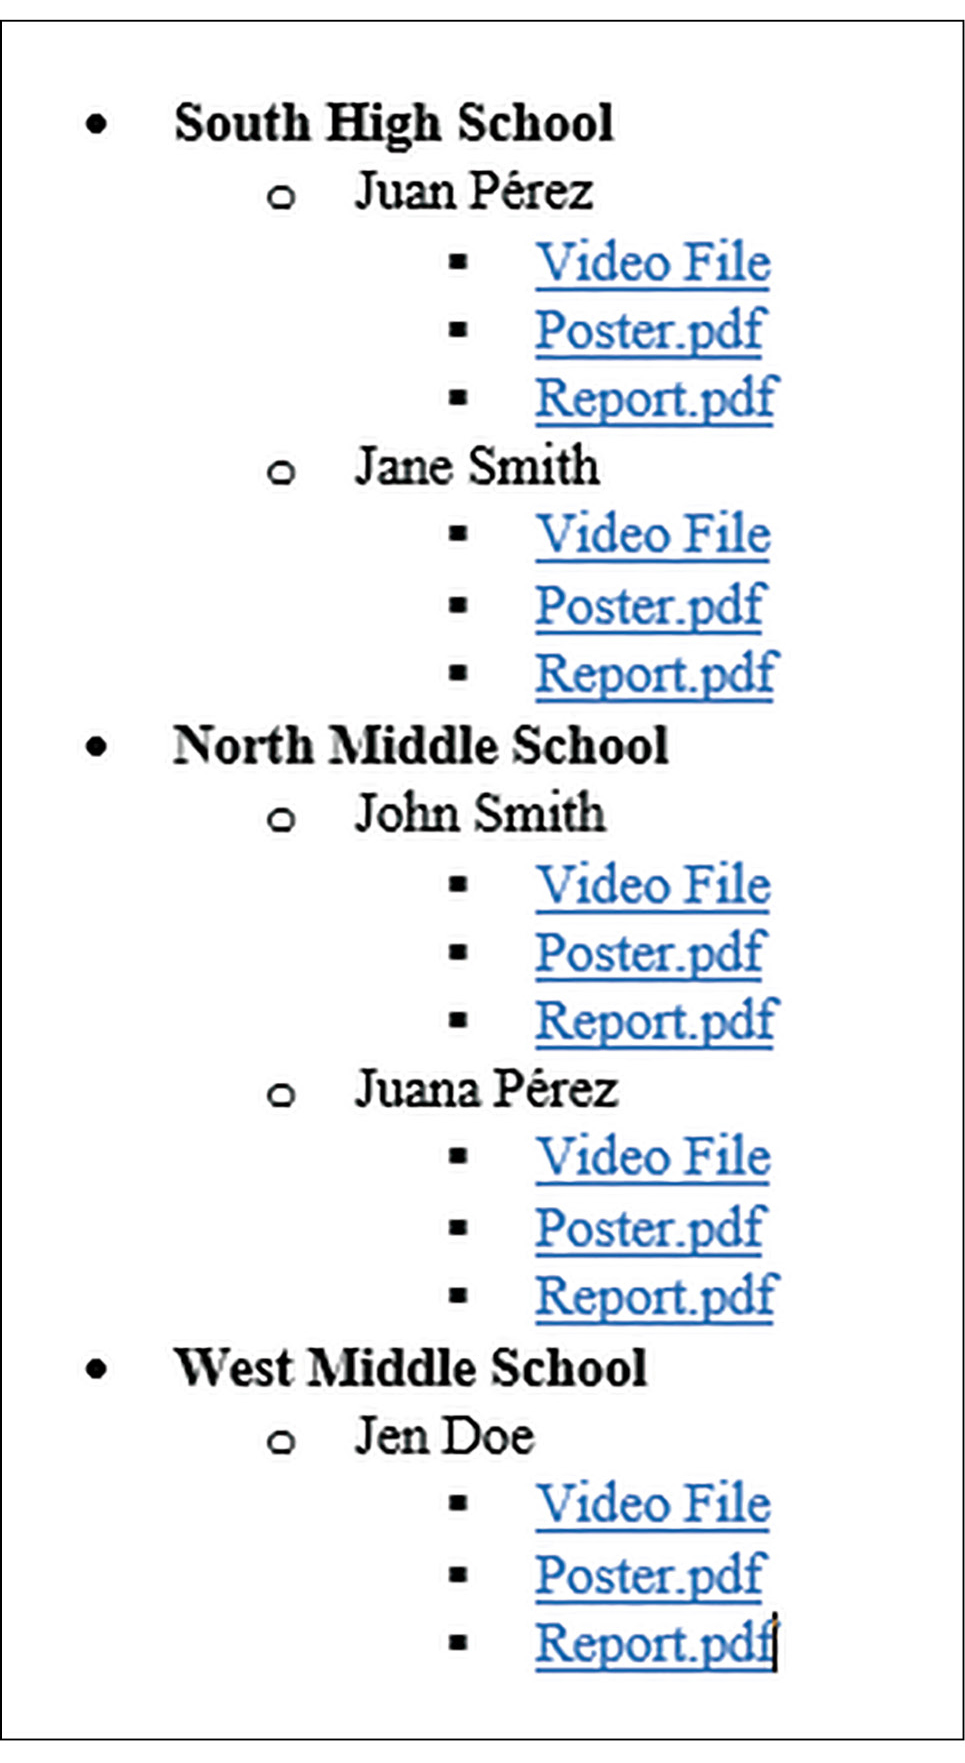 A generic example of levels of organization for school projects; image shows project files as blue hyperlinks, indicating how judges can navigate through their assigned projects.